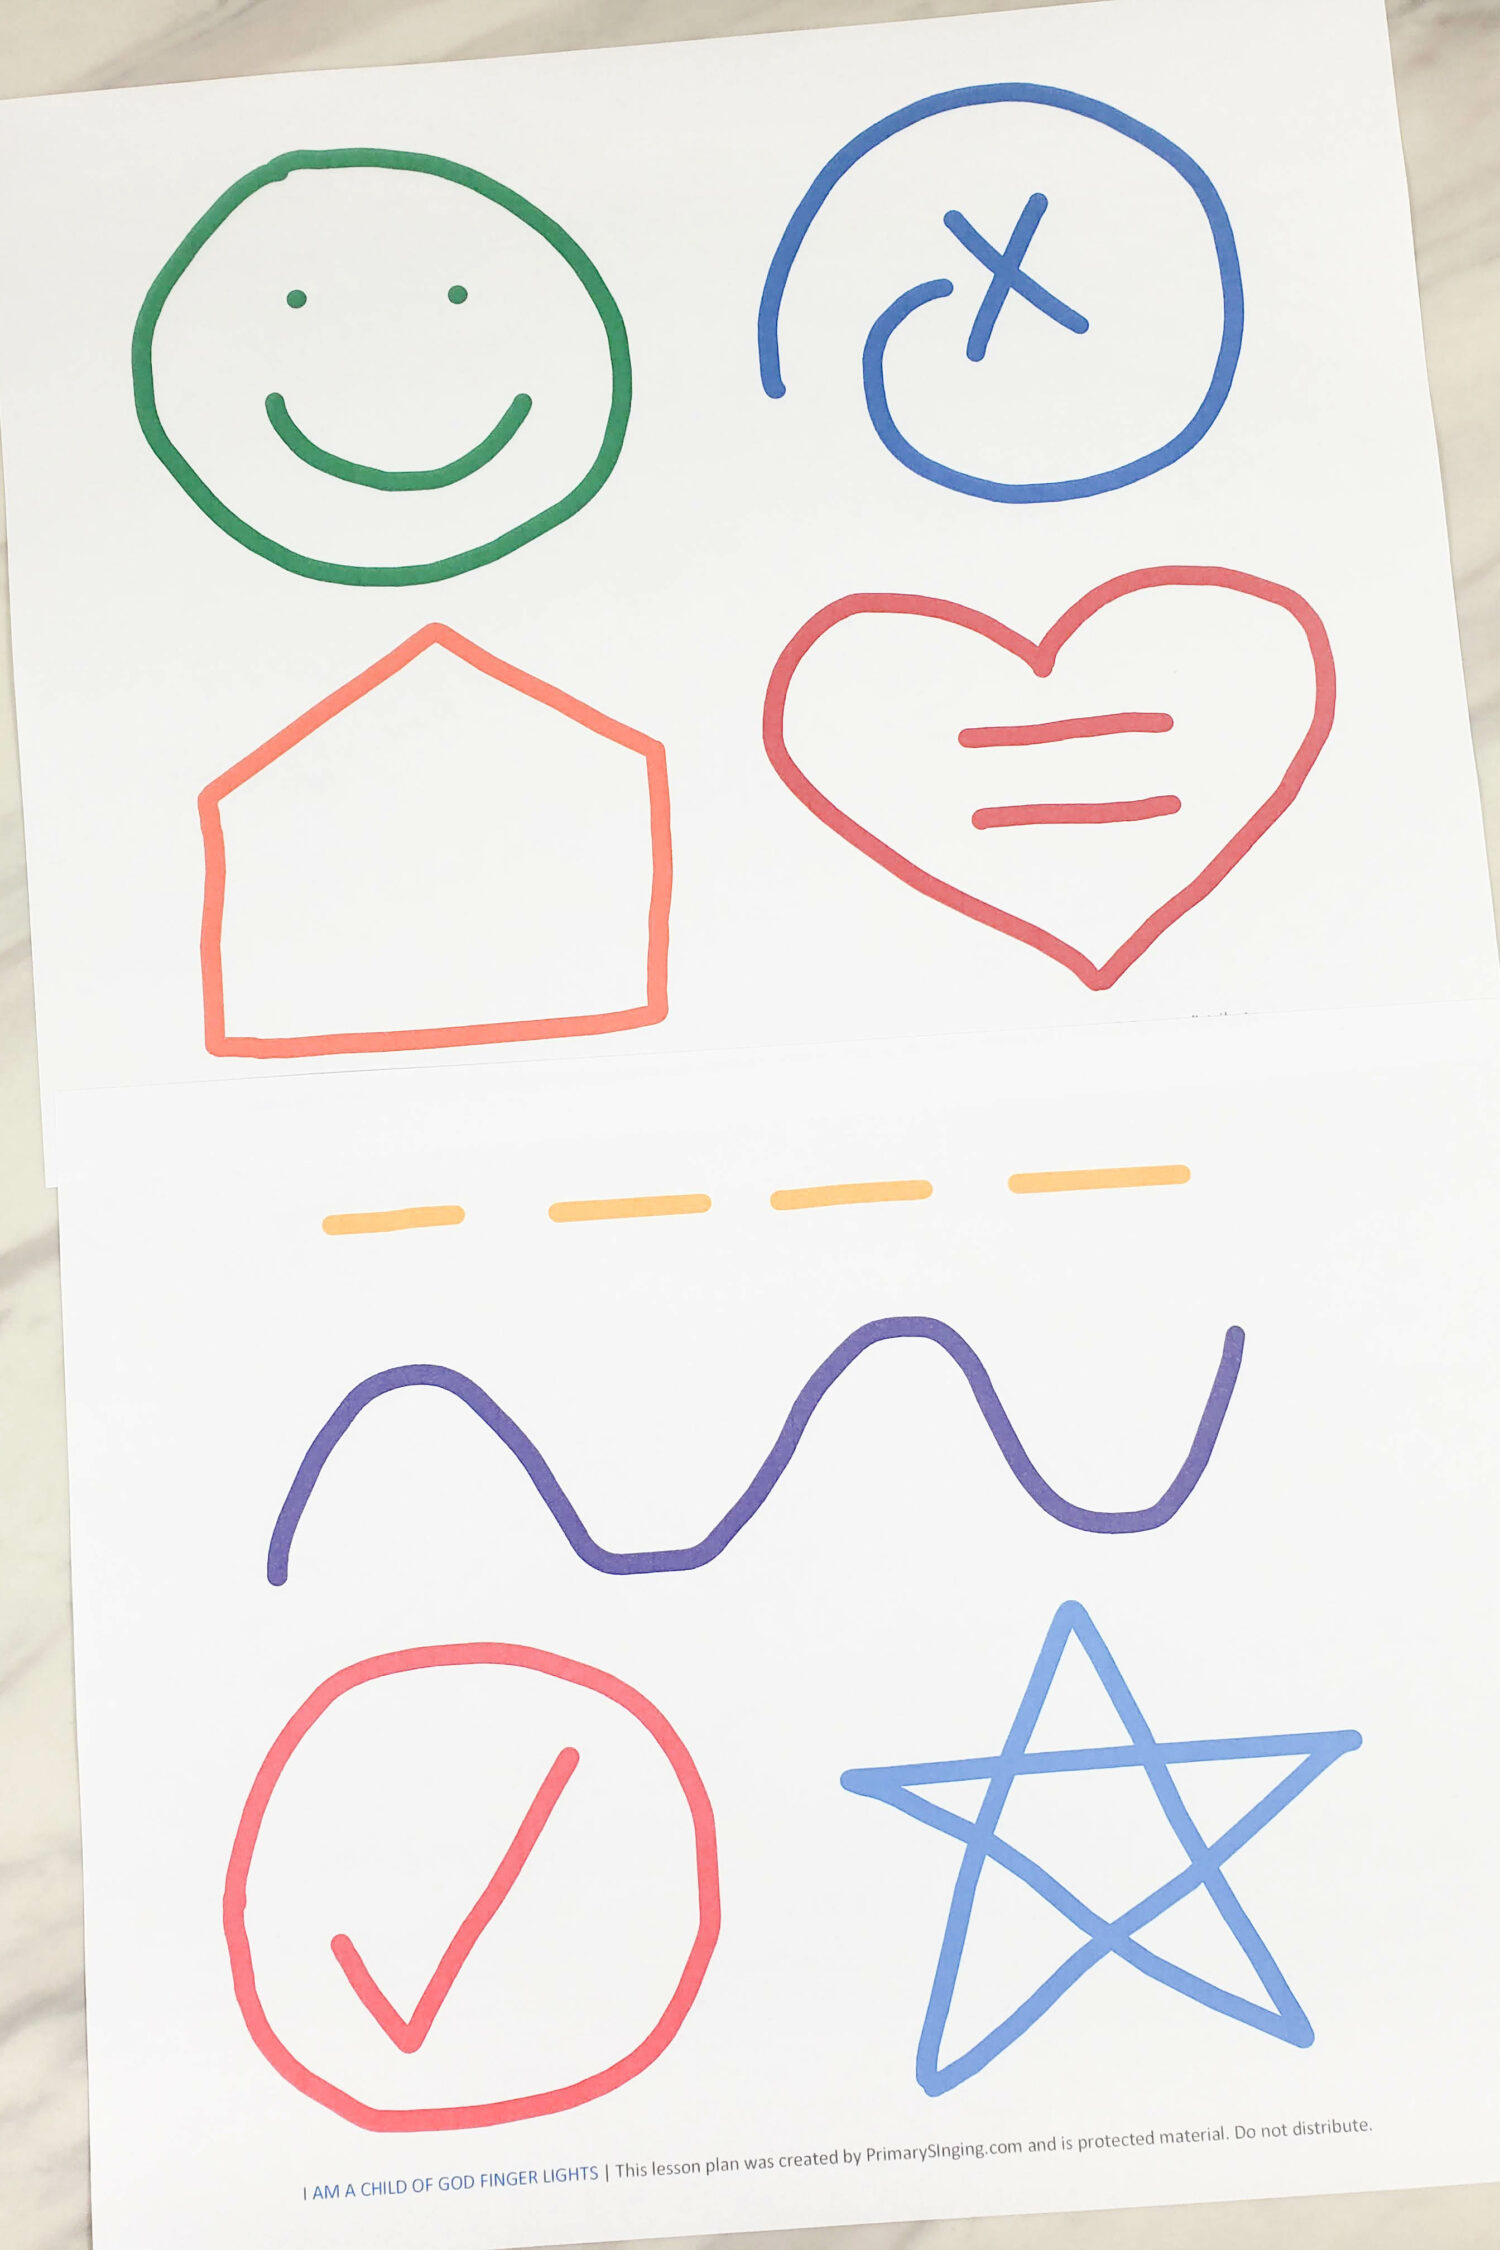 I Am a Child of God Finger Lights or Magic Crayon singing time idea! Draw the shapes in the air that go along with the song with different actions for each verse. Great teaching activity for LDS Primary music leaders.